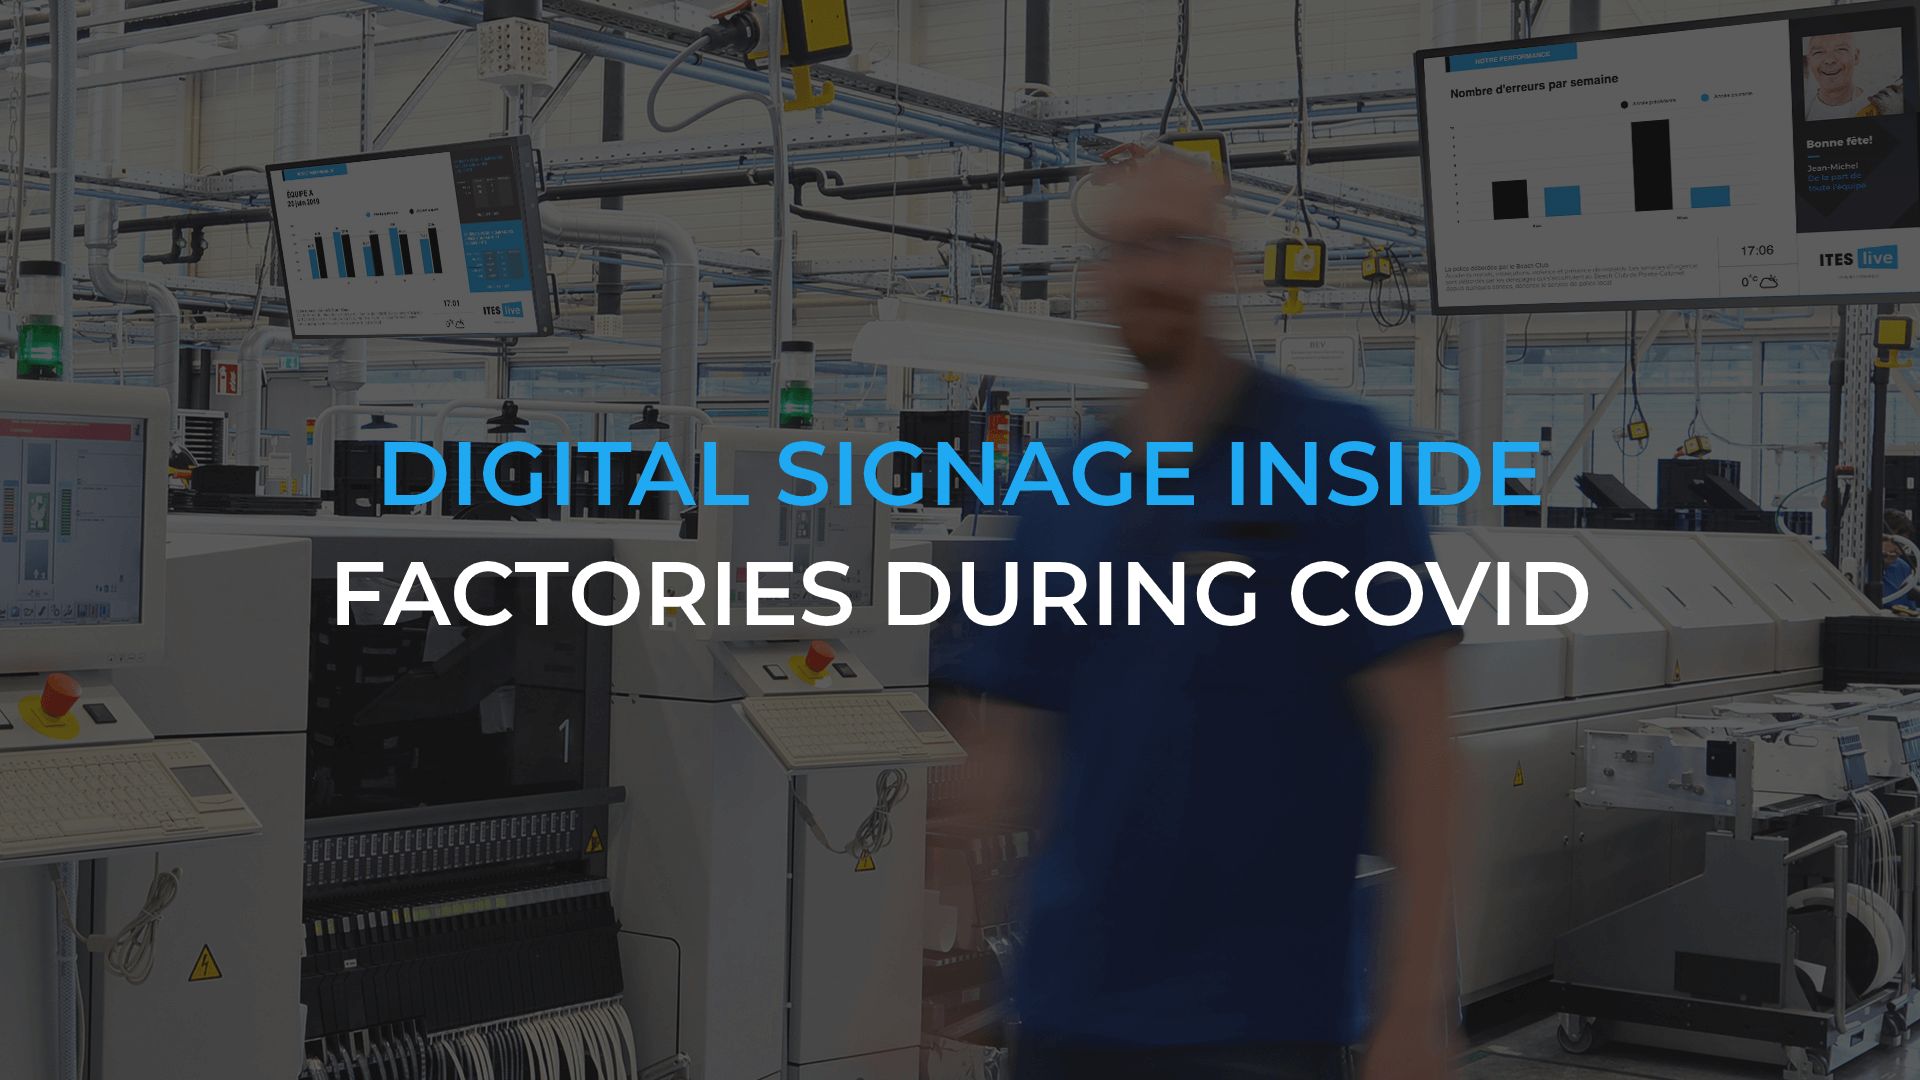 Digital signage inside factories during COVID